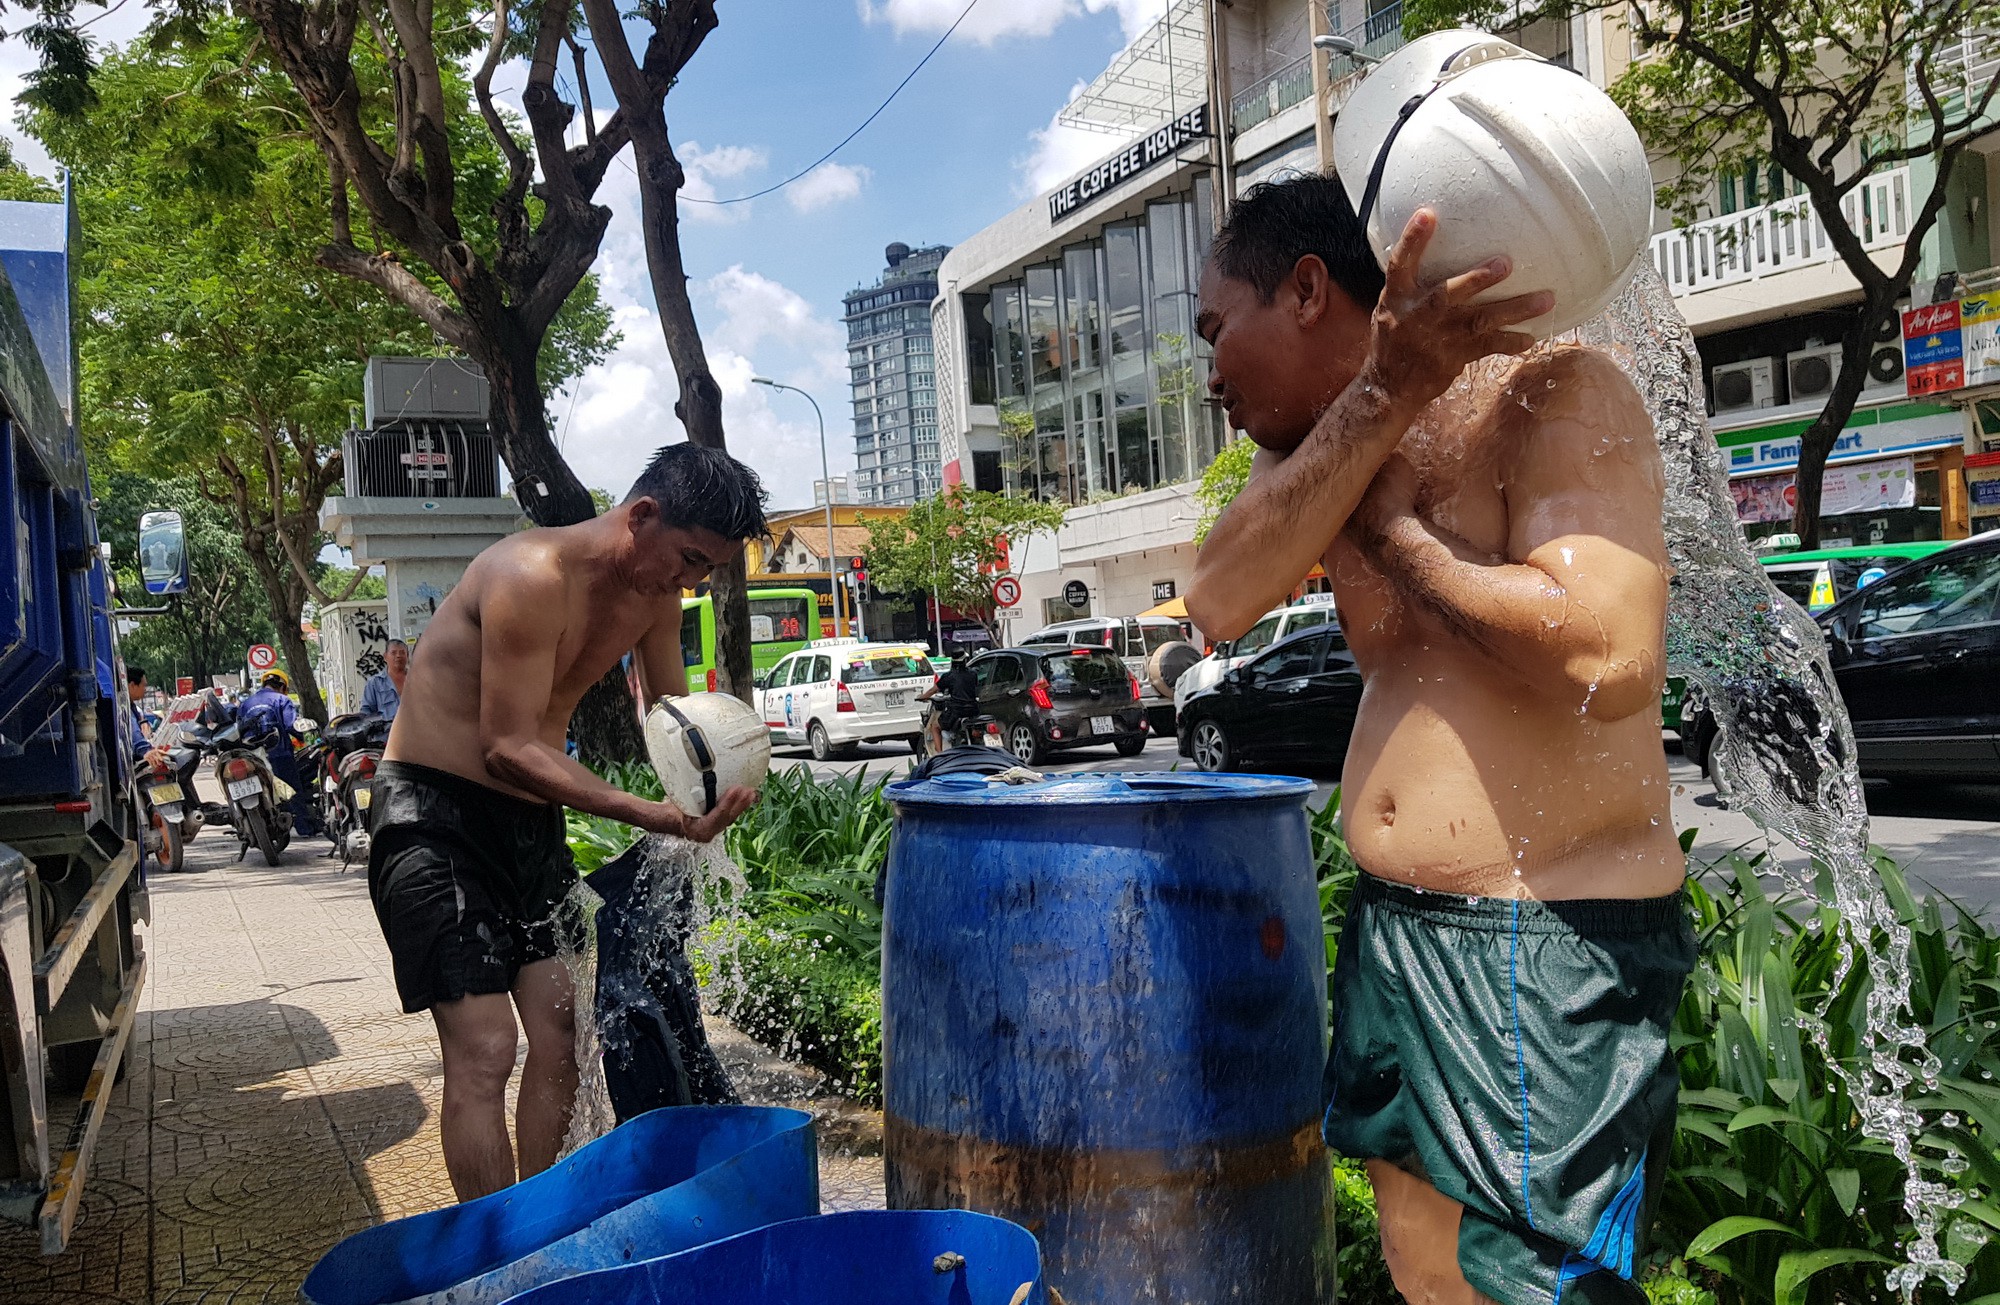 Drainage workers wash themselves along a street in Ho Chi Minh City, Vietnam. Photo: Tuoi Tre